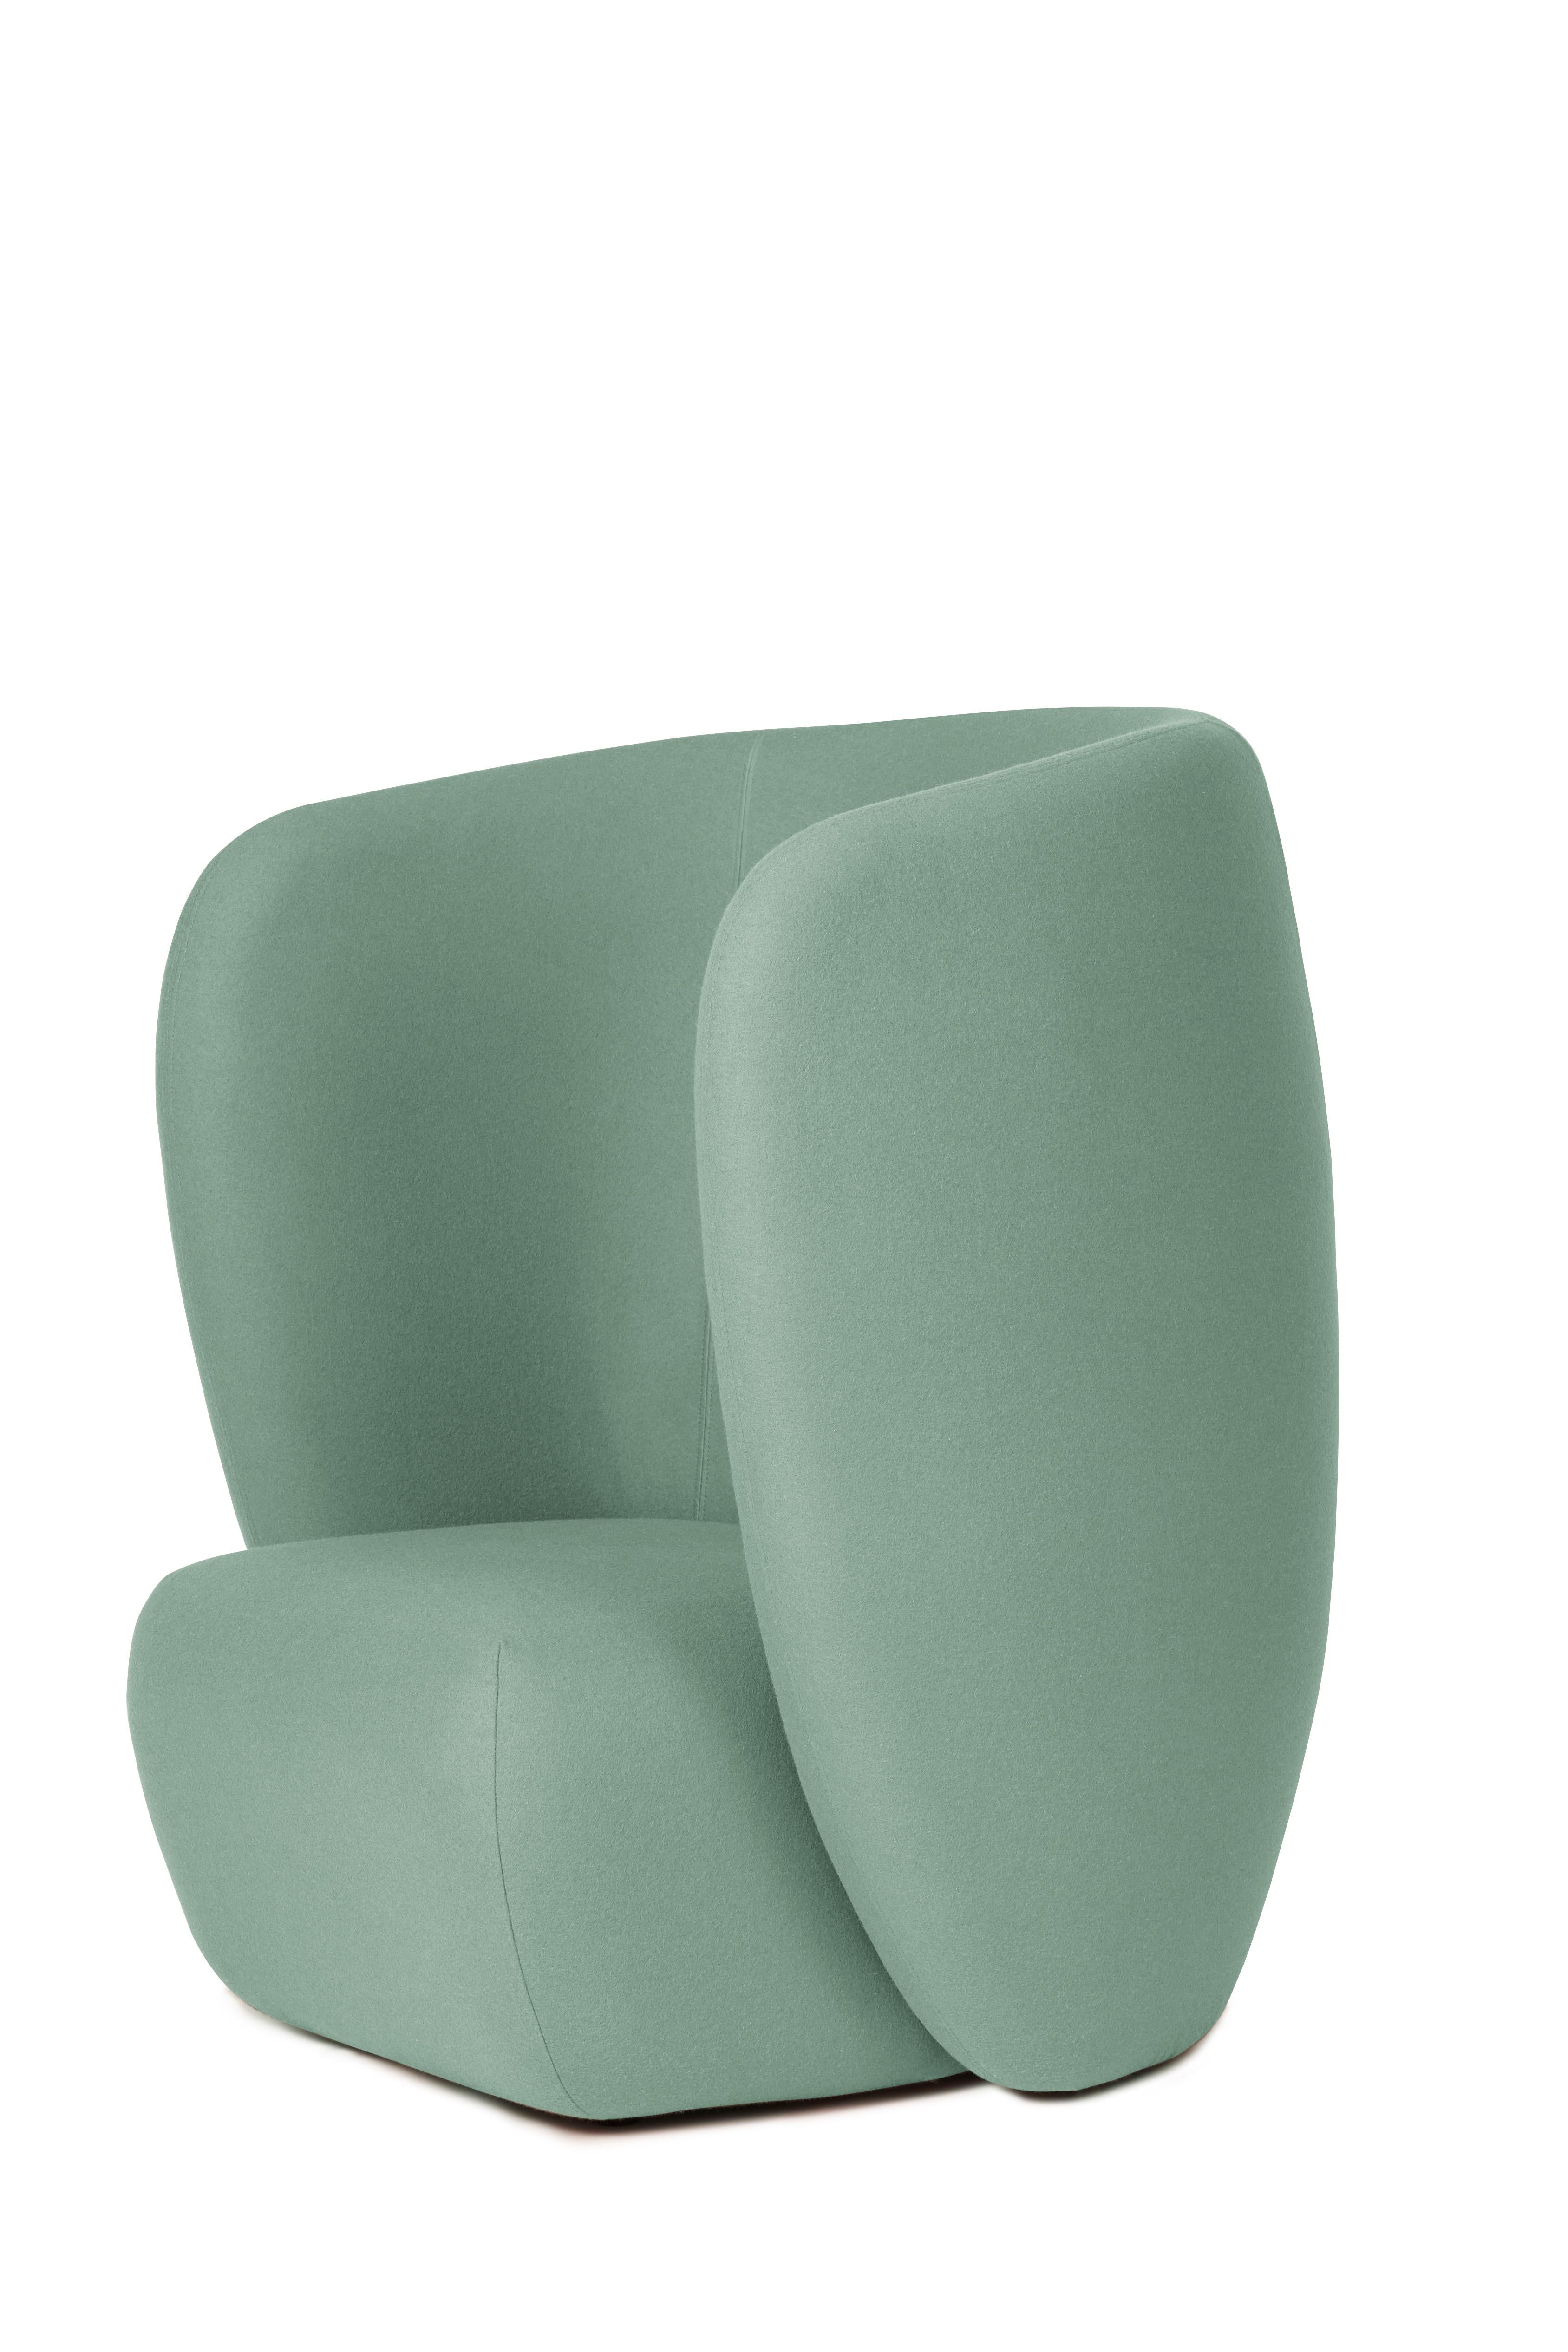 For Sale: Blue (Hero 931) Haven Lounge Chair, by Charlotte Høncke from Warm Nordic 2